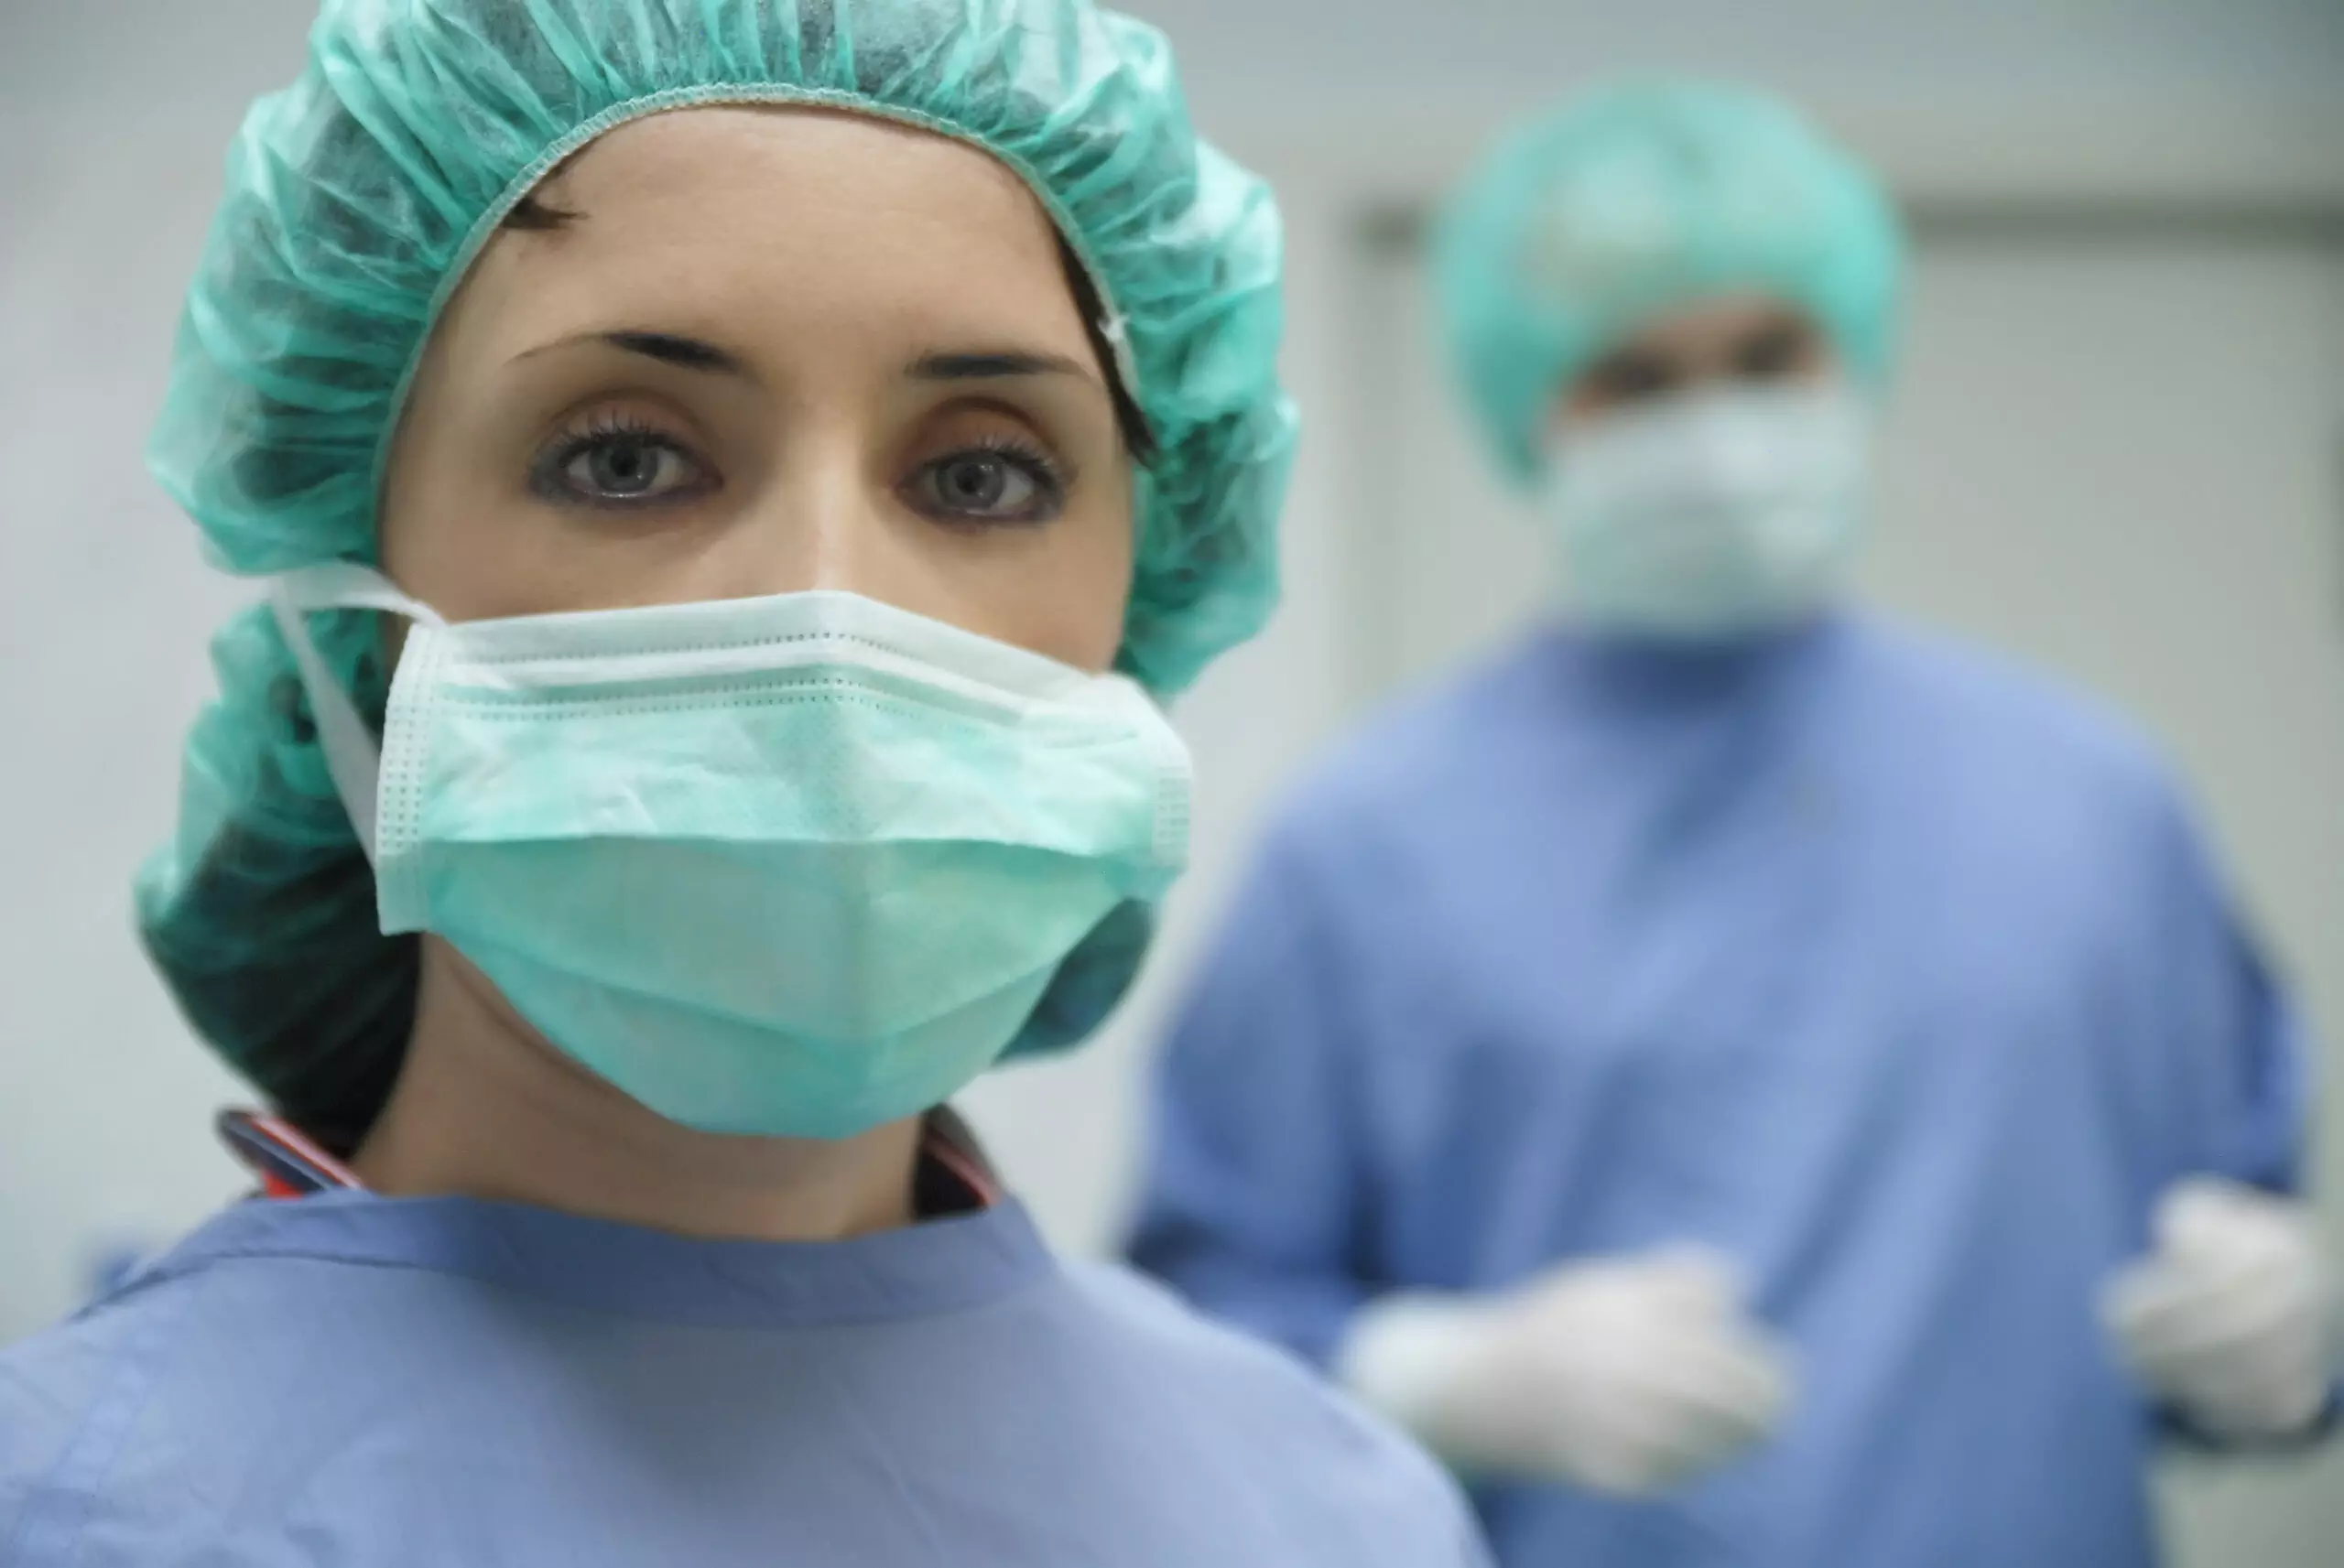 Medical professionals in surgery attire with masks.